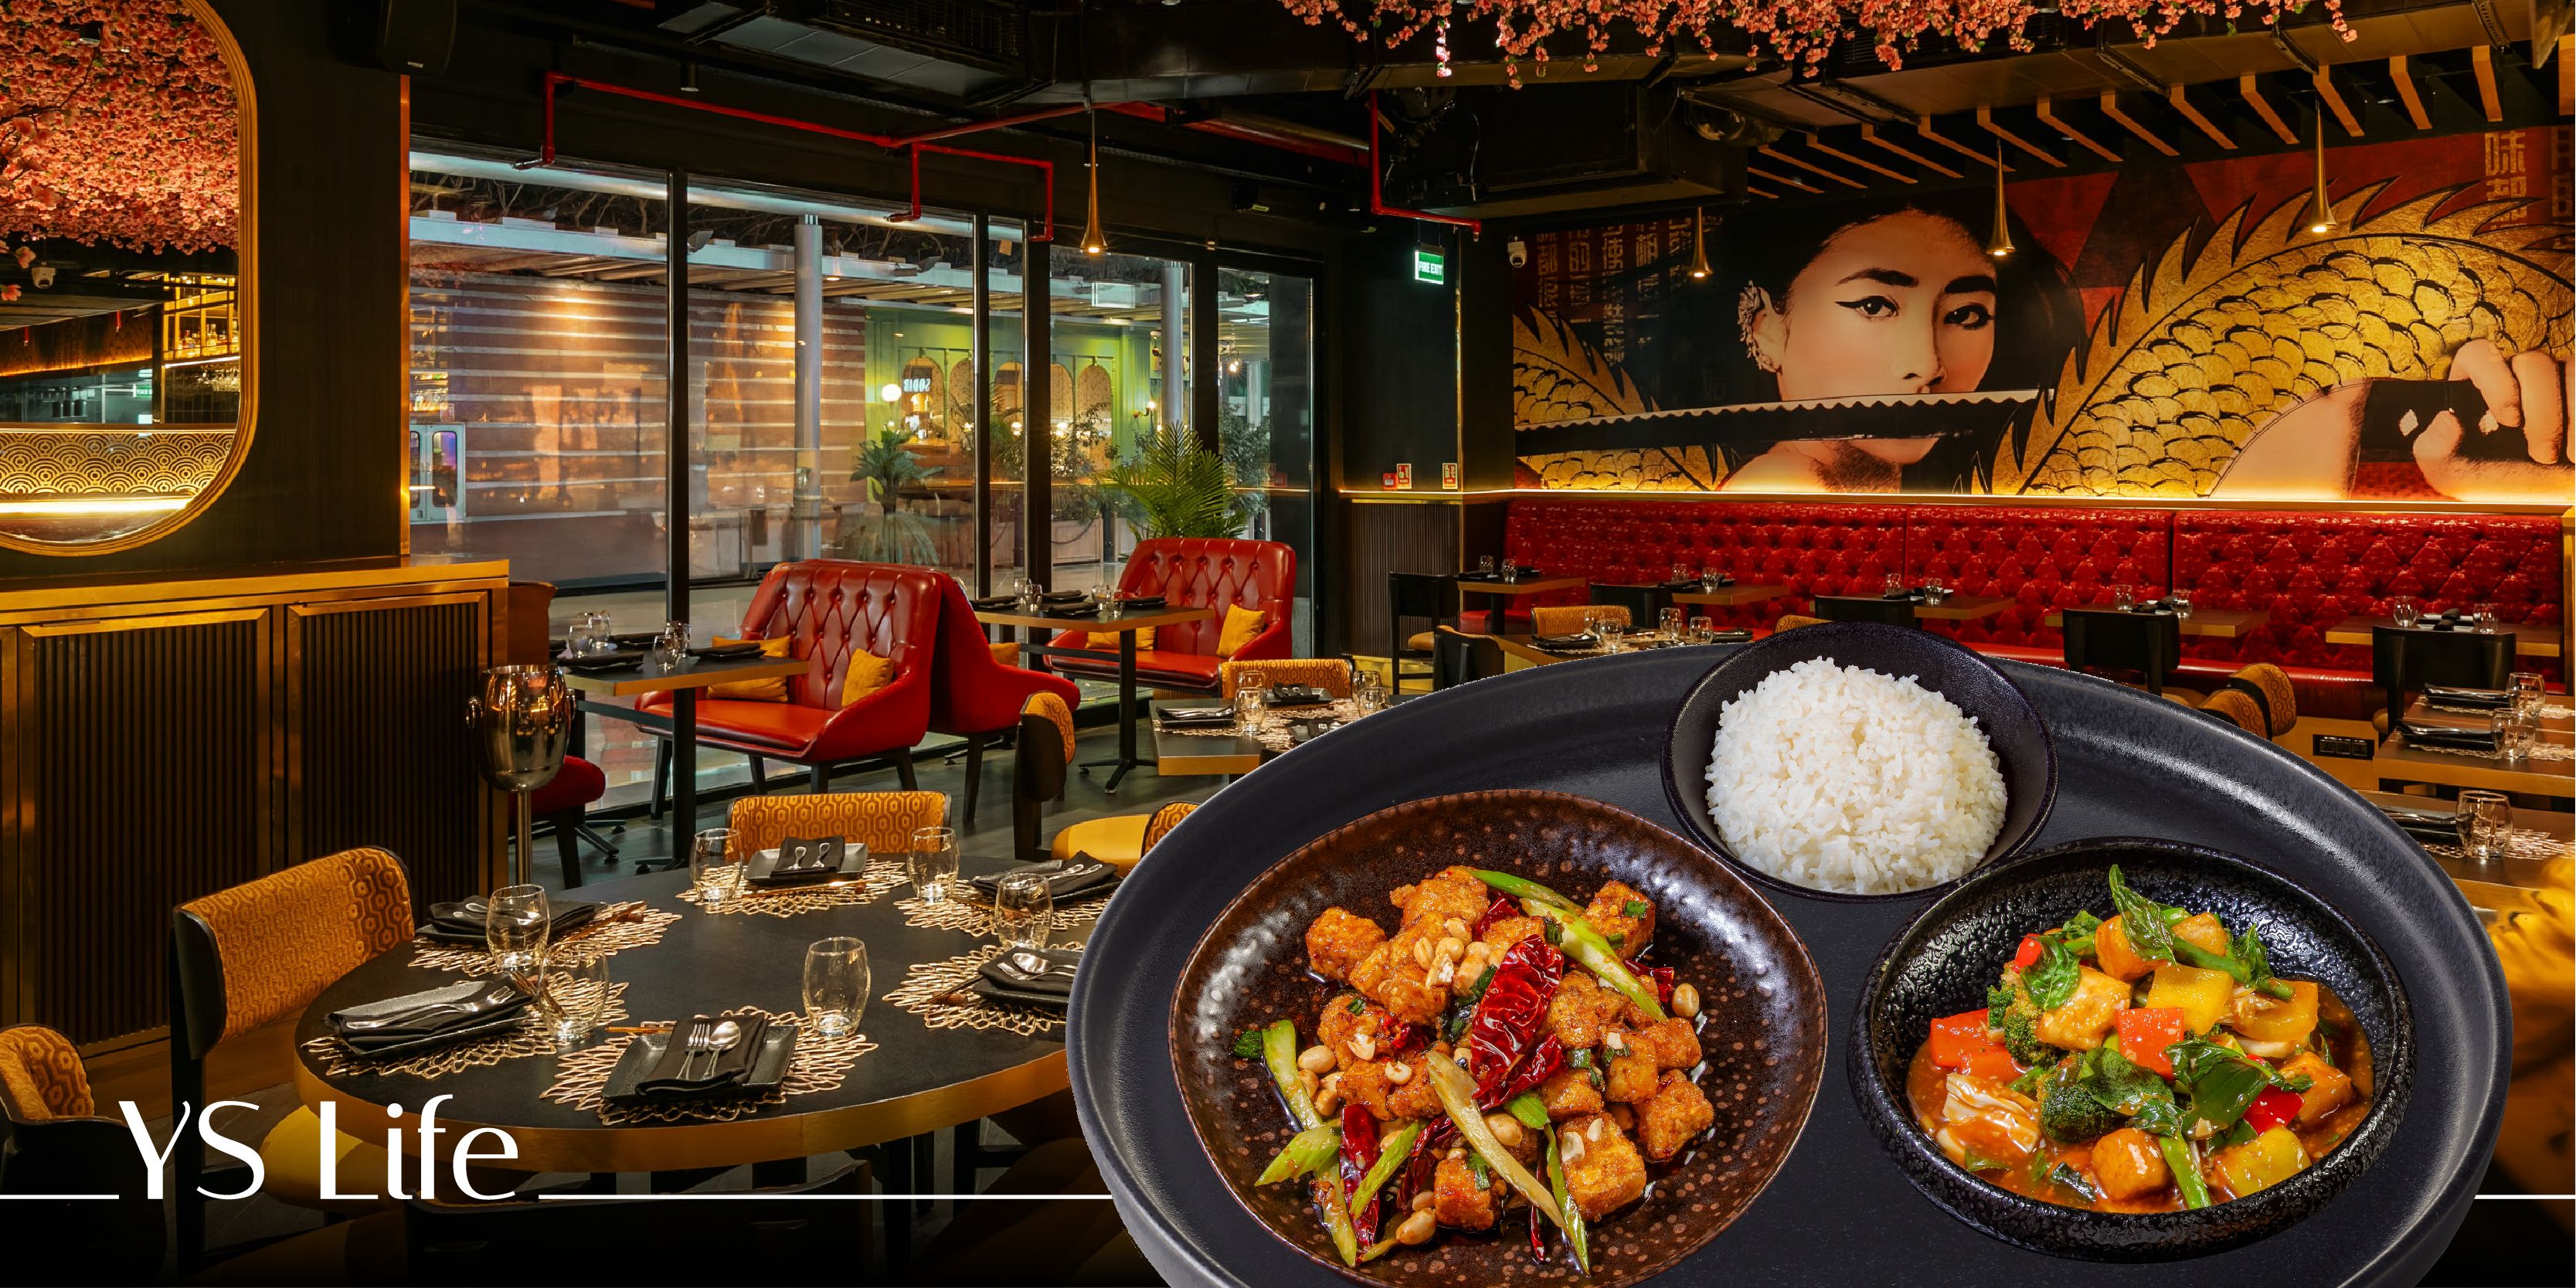 It’s a matter of wok: P.F Chang’s is bringing American-Asian cuisine to India